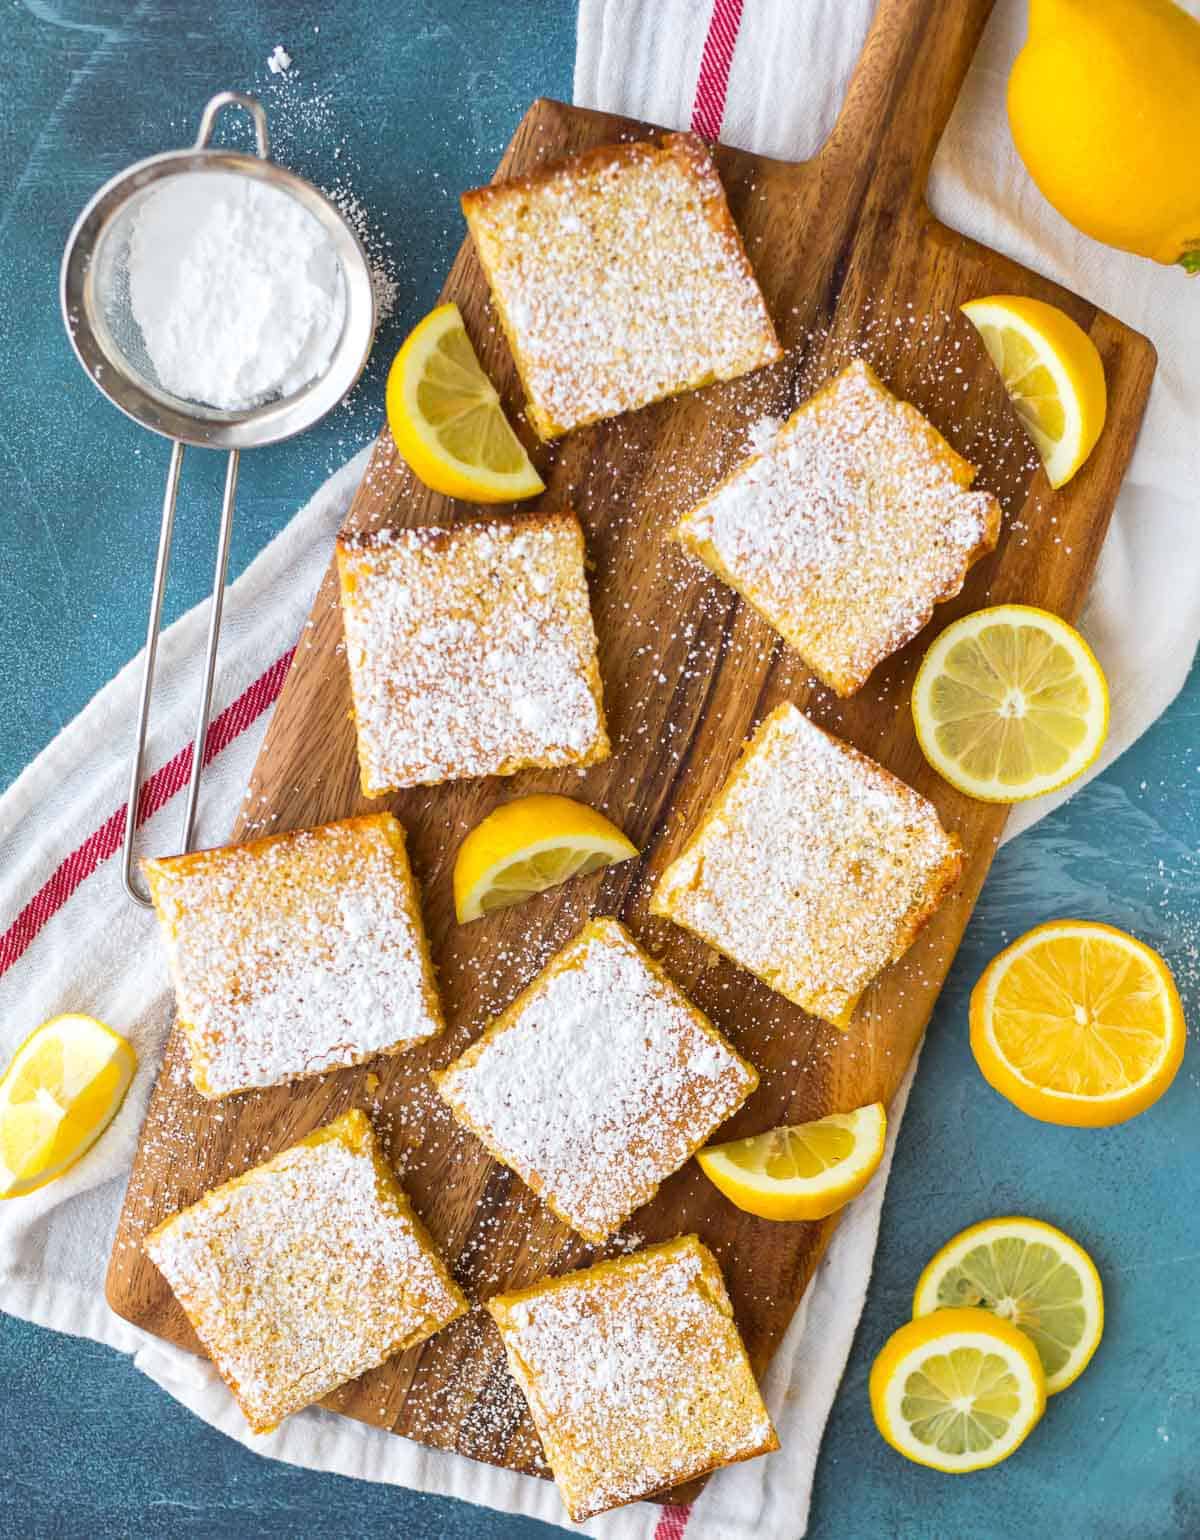 Homemade lemon bars dusted with powdered sugar on a wood serving board with lemon slices and wedges